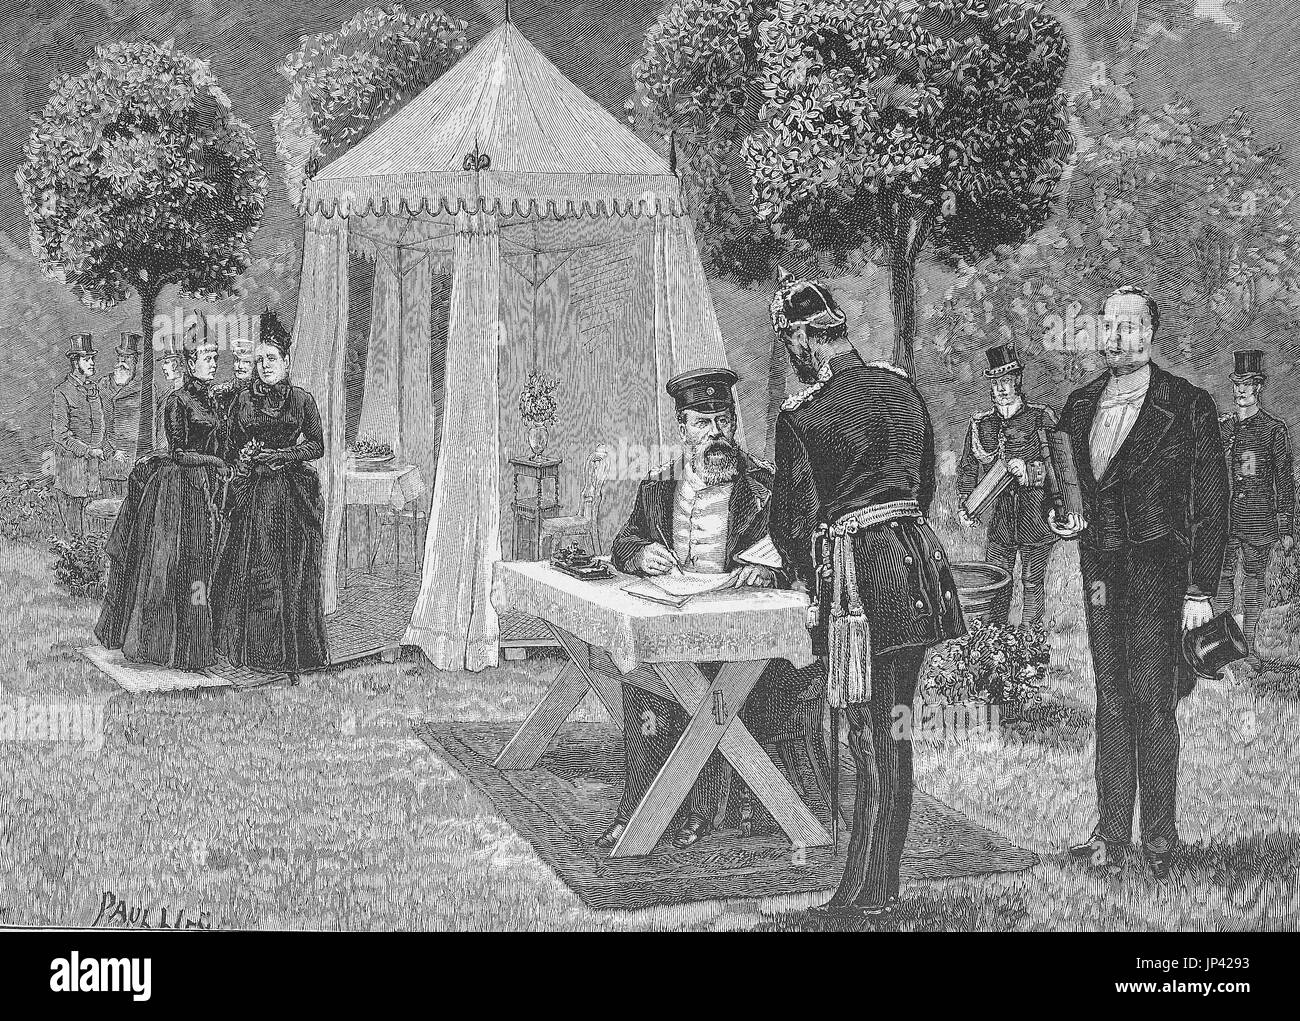 Emperor Heinrich before his party tent, he signed documents, Original drawing by Paul Heydel, Germany, digital improved reproduction of a woodcut publication from the year 1888 Stock Photo